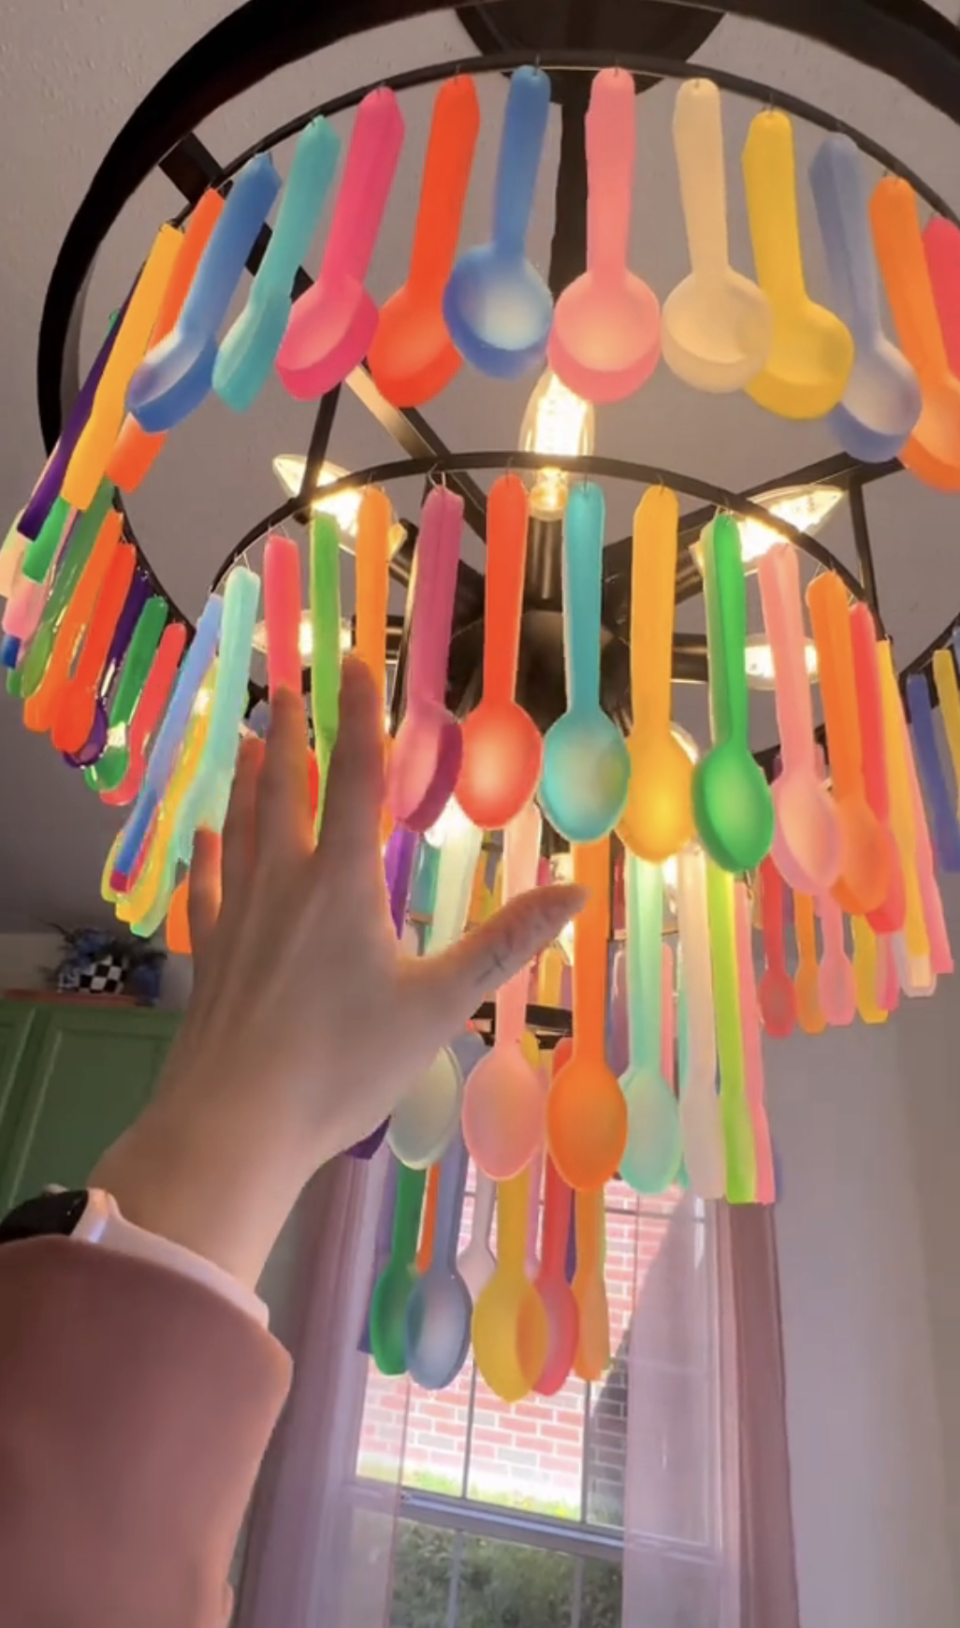 Hand touching a colorful chandelier made with dangling utensils in a room